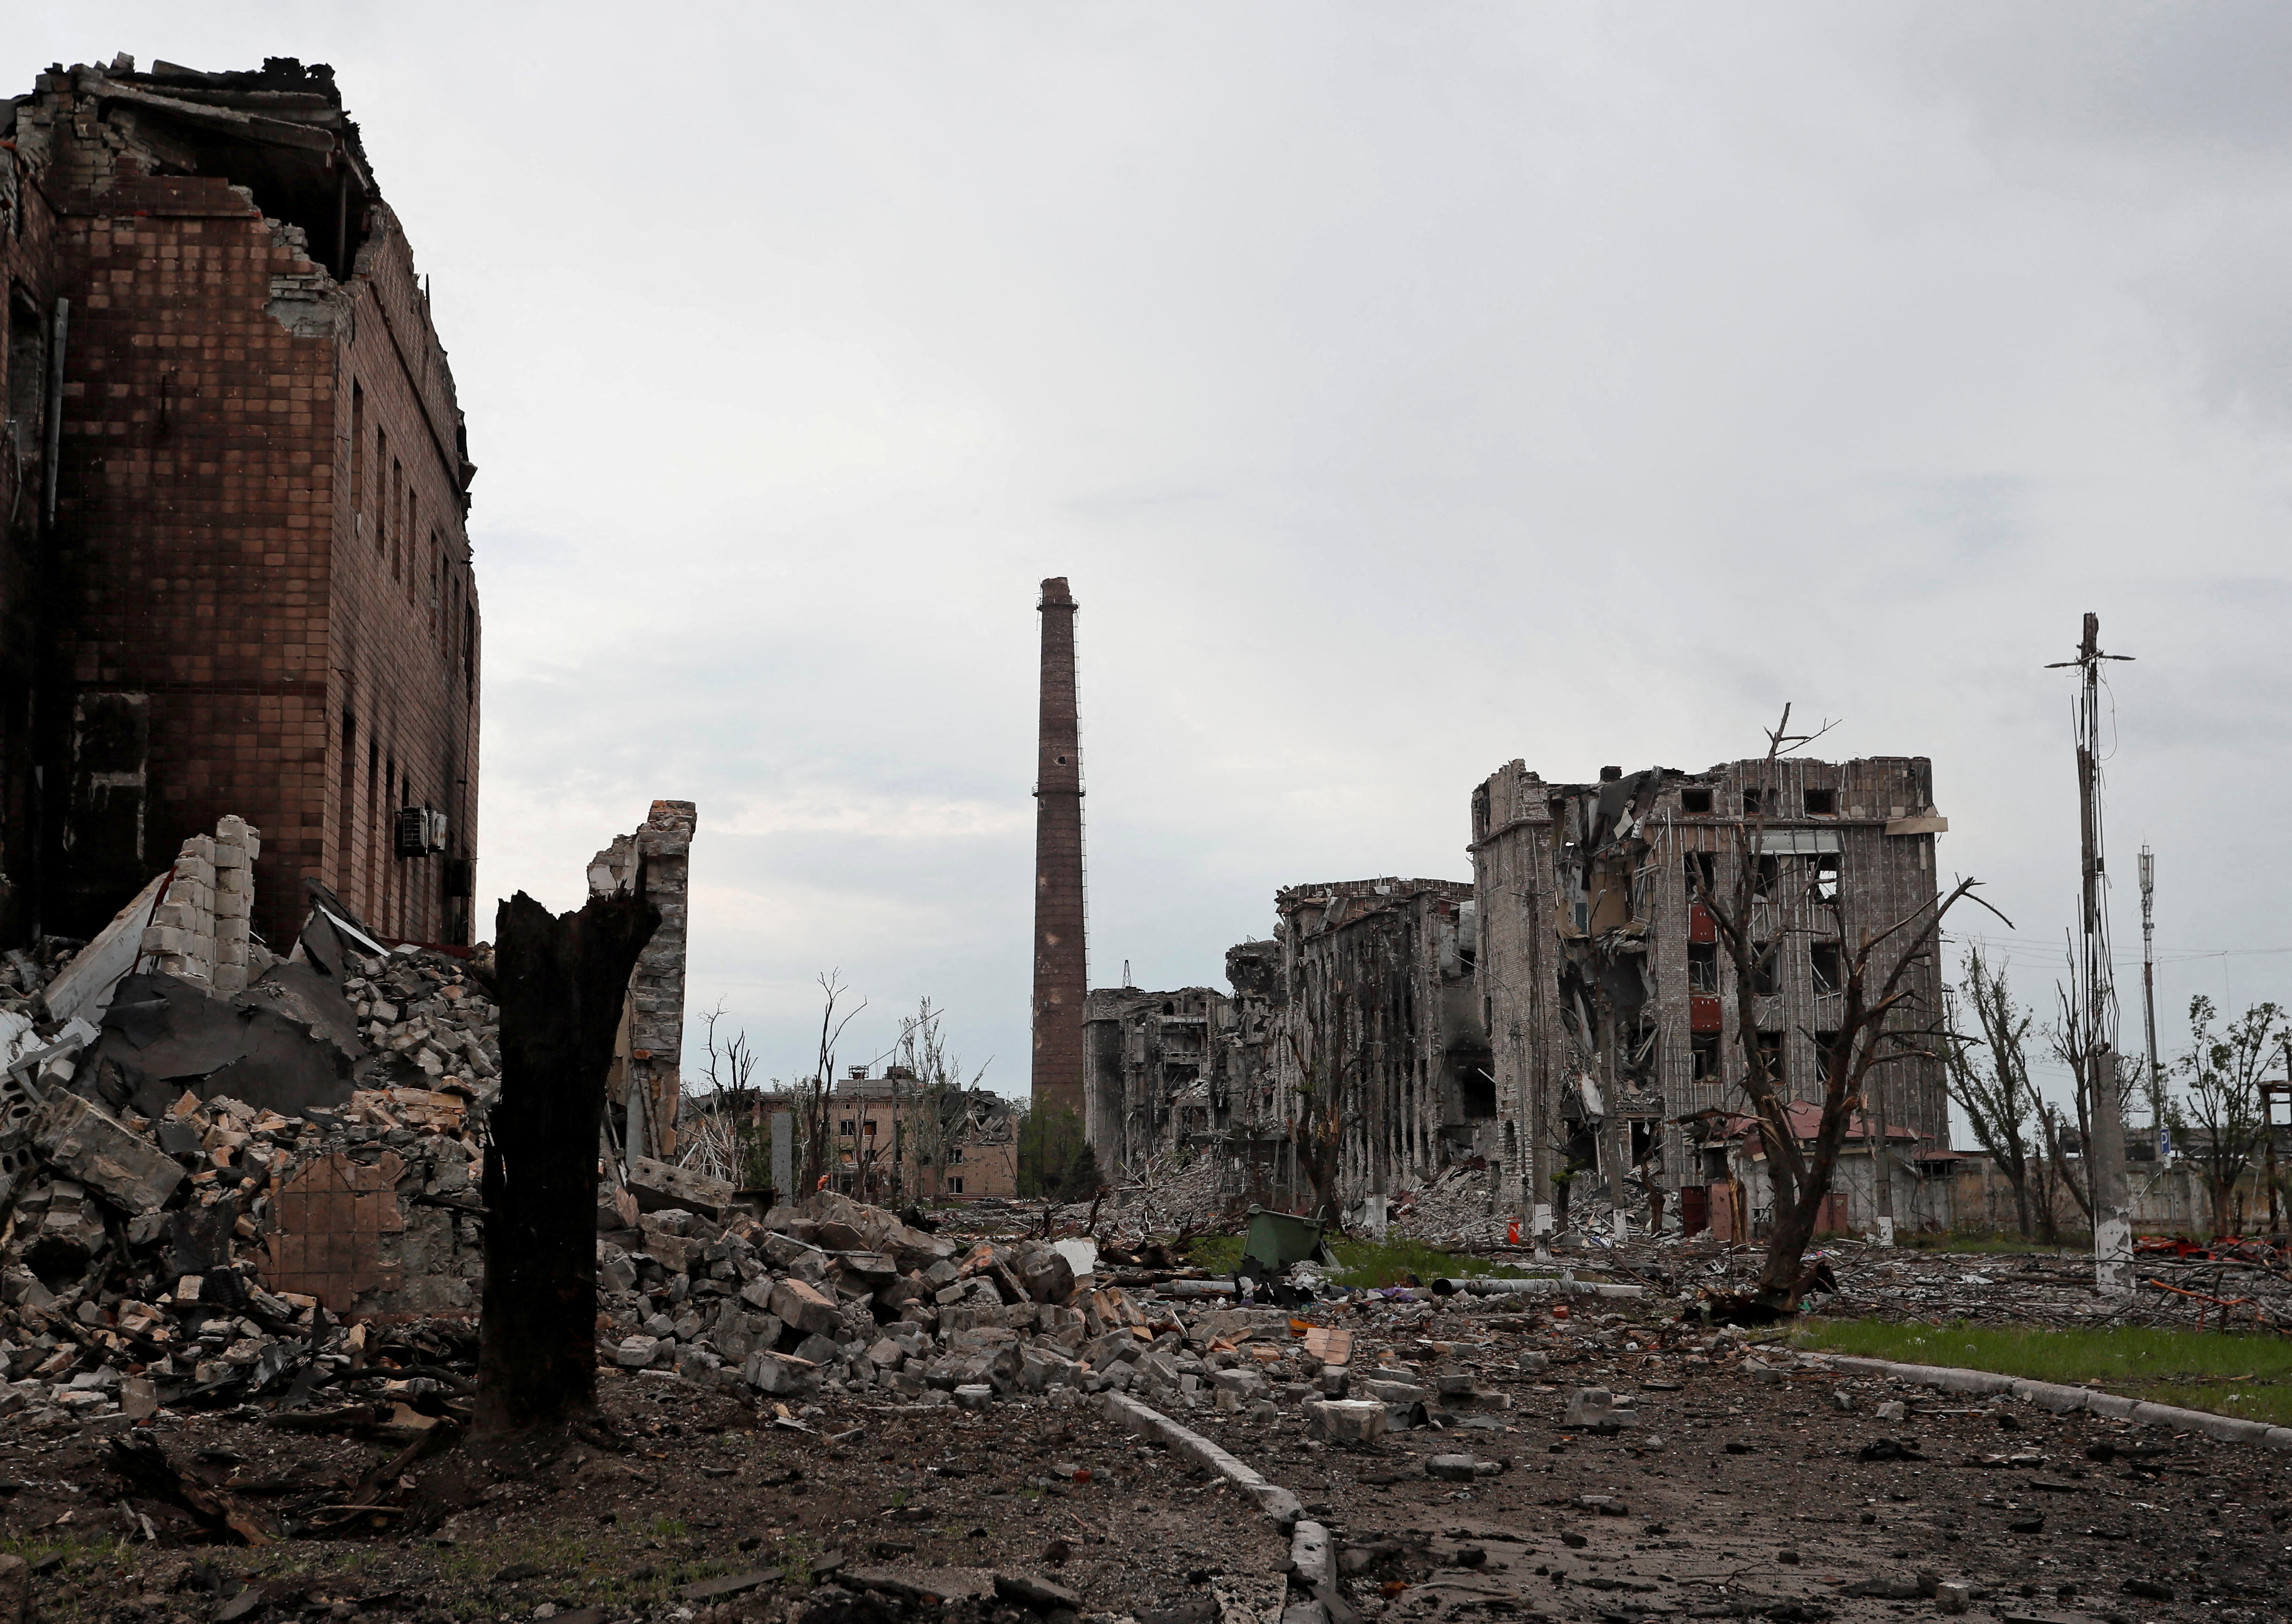 A view shows destroyed facilities of Azovstal steel plant in Mariupol